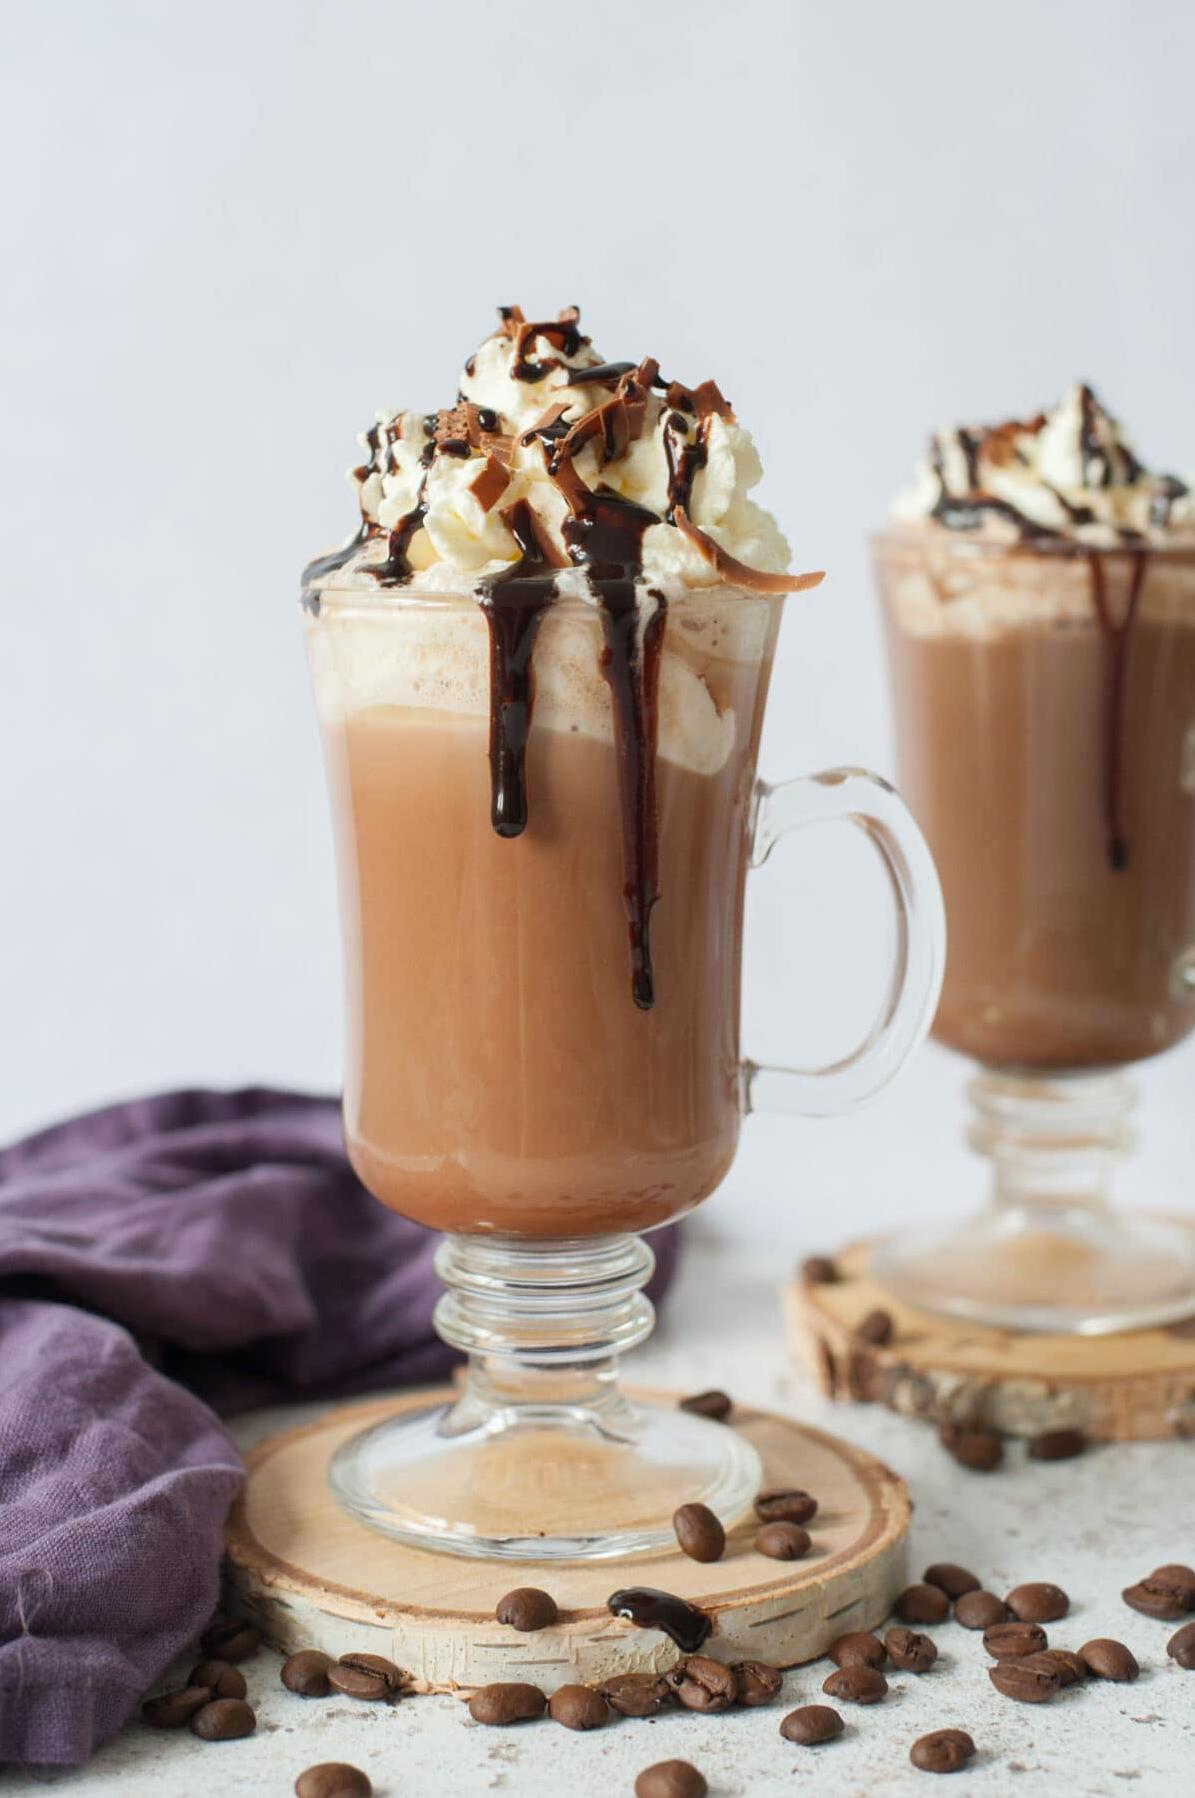  Enjoy every sip of this warm and comforting drink